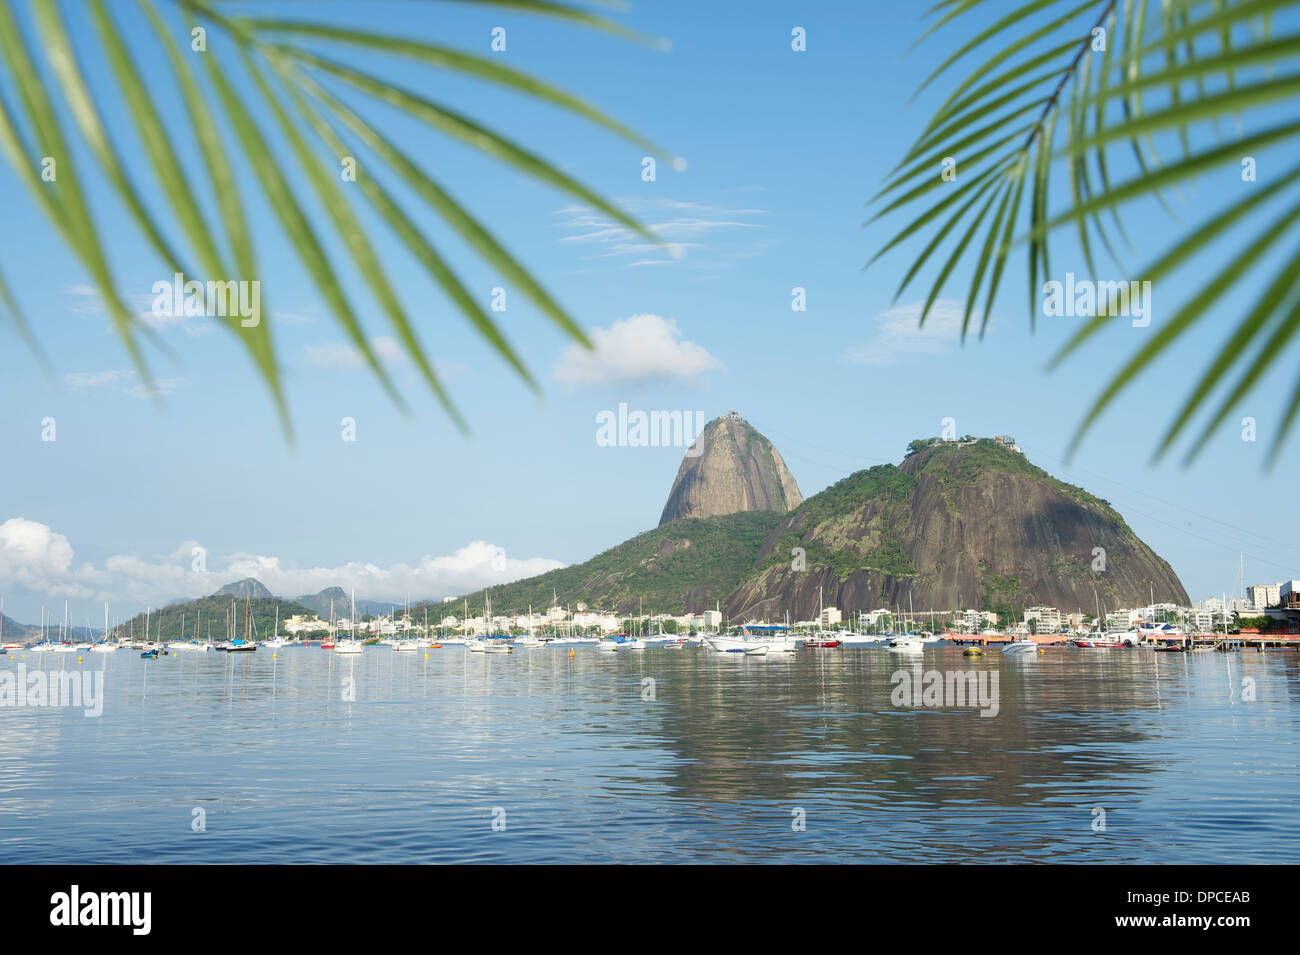 Scenic view of Sugarloaf Pao de Acucar Mountain Rio de Janeiro Brazil from Botafogo Bay framed by palms Stock Photo